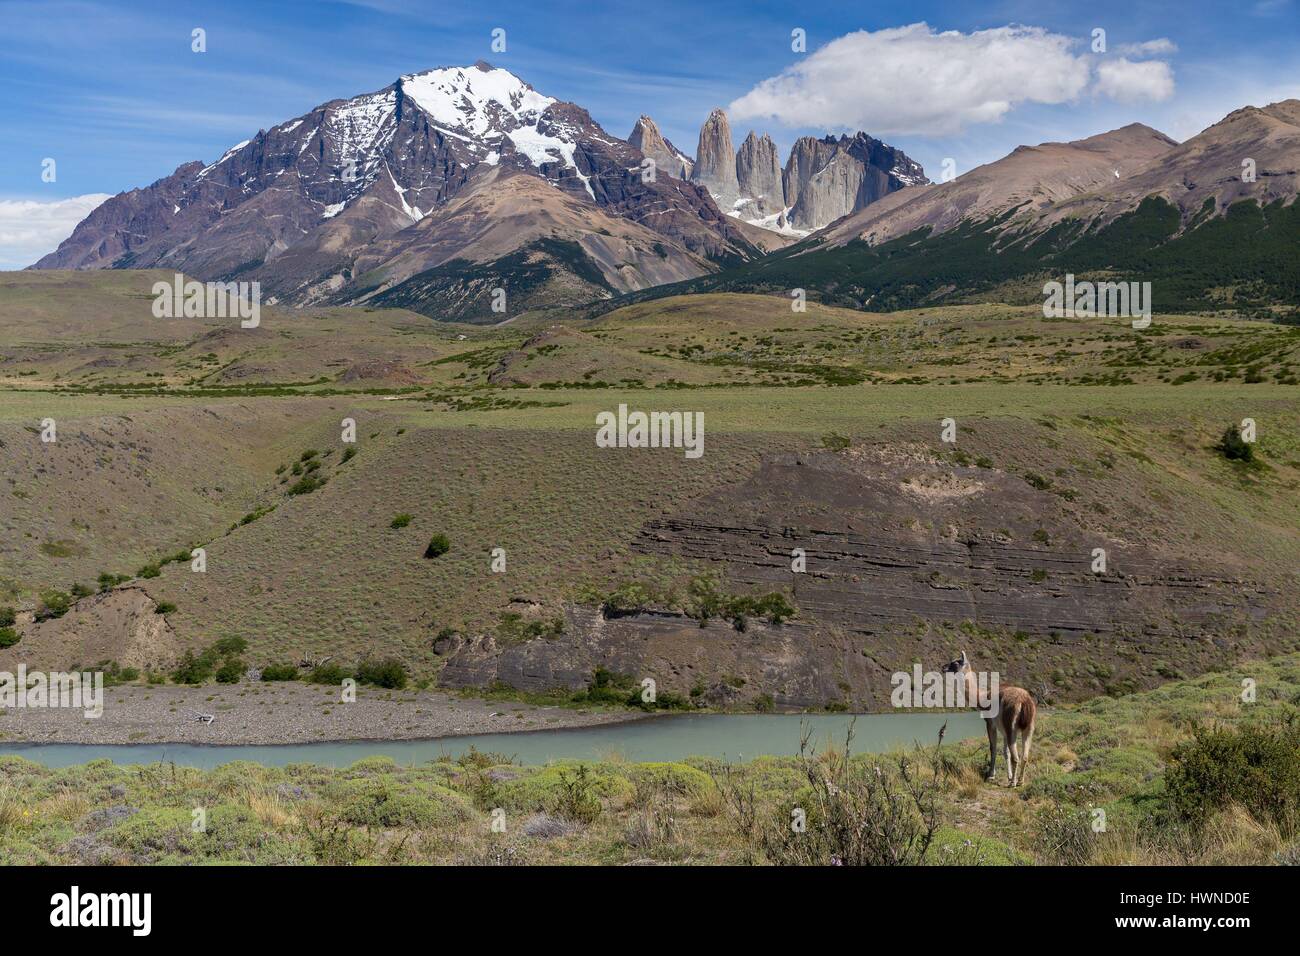 Chile, Patagonia, Aysen region, Torres del Paine national park, guanaco Stock Photo